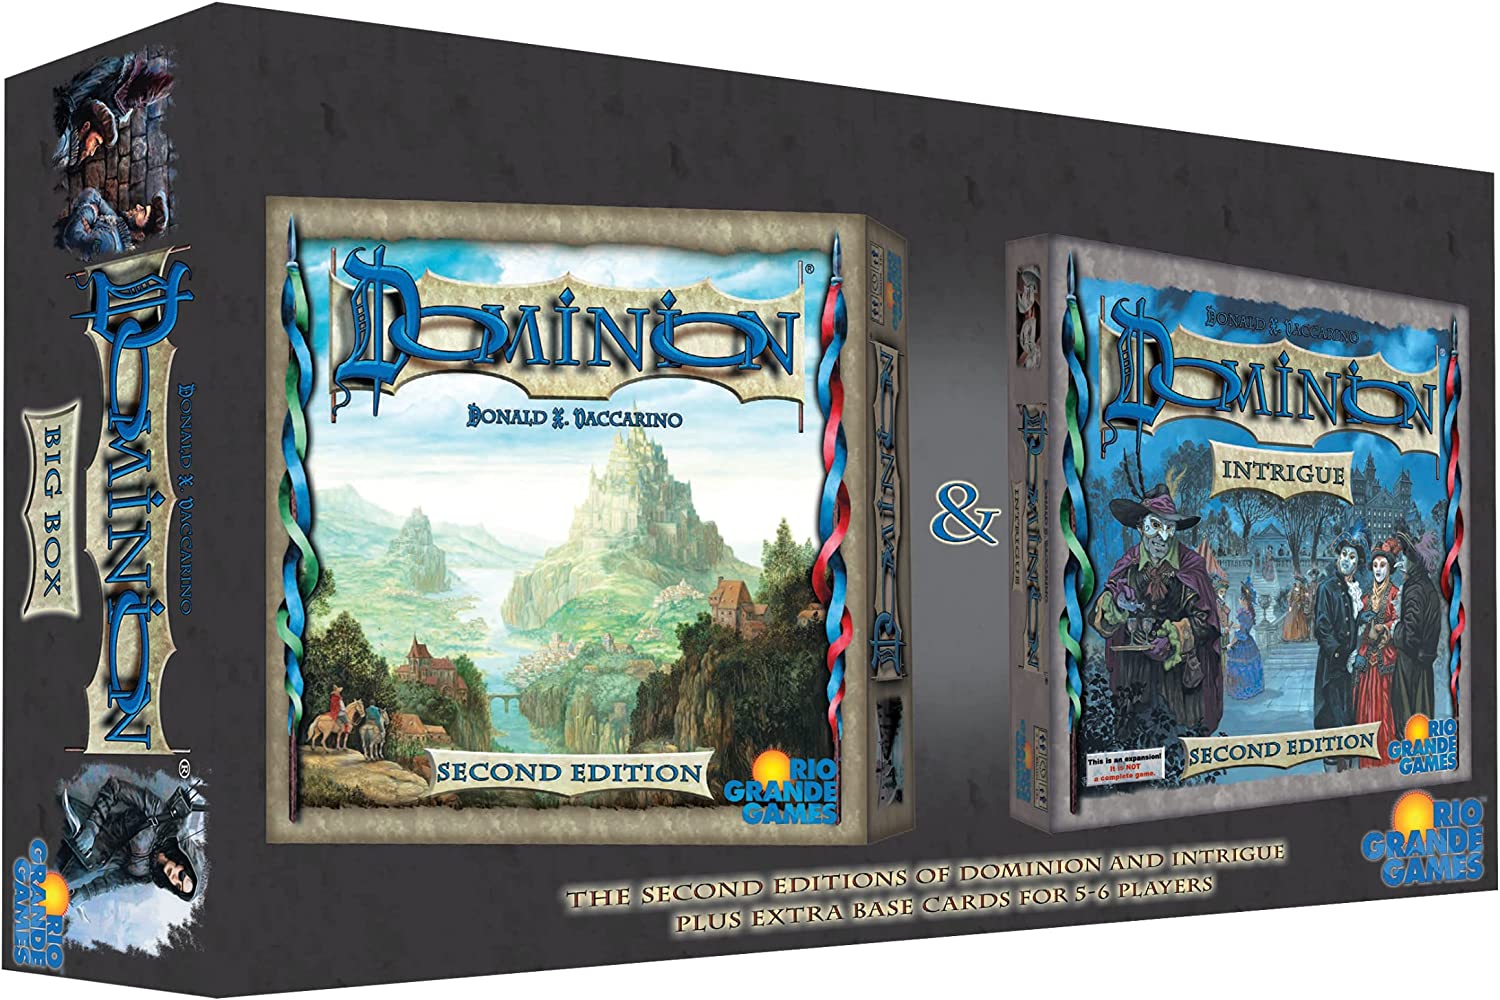 Dominion Big Box: Master the Art of Deck Building with Base Game & Intrigue Expansion - Bards & Cards